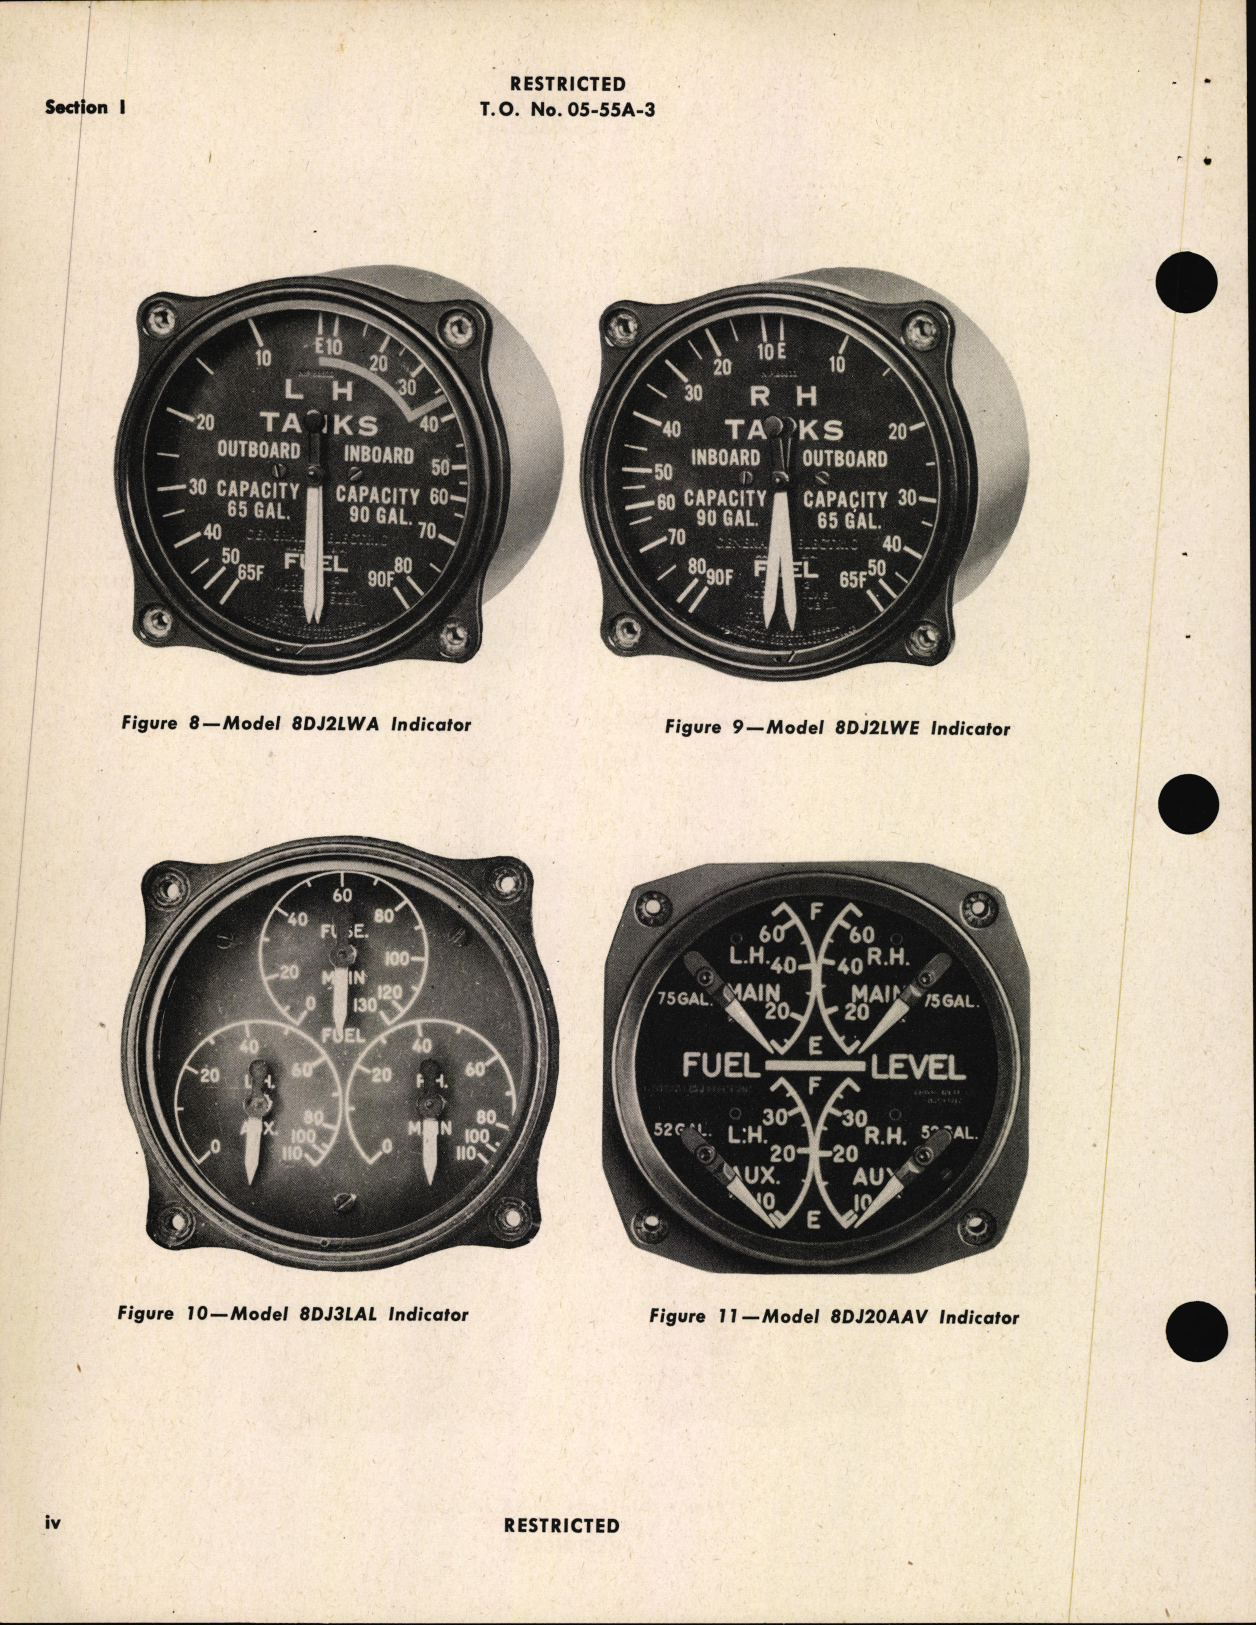 Sample page 6 from AirCorps Library document: Handbook of Instructions with Parts Catalog for D-C Selsyn Fuel Level Gages